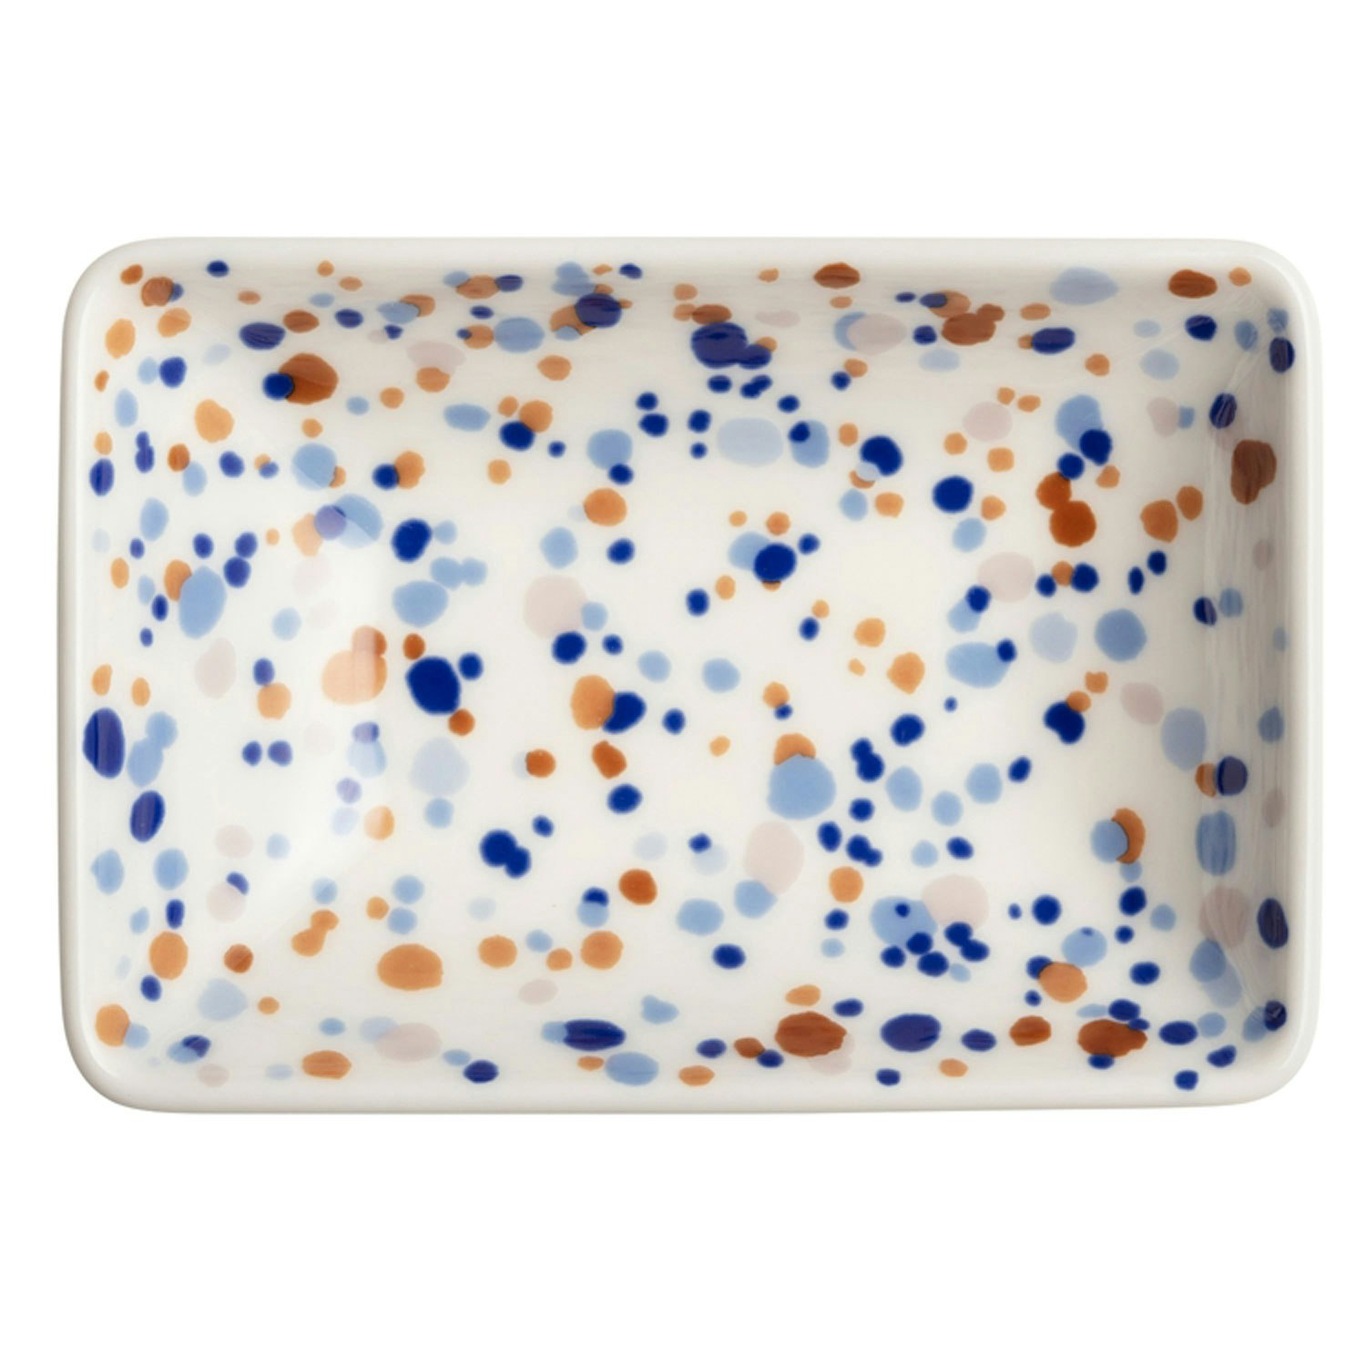 Oiva Toikka Collection Helle Plate Blue / Brown, A7 7x10 cm